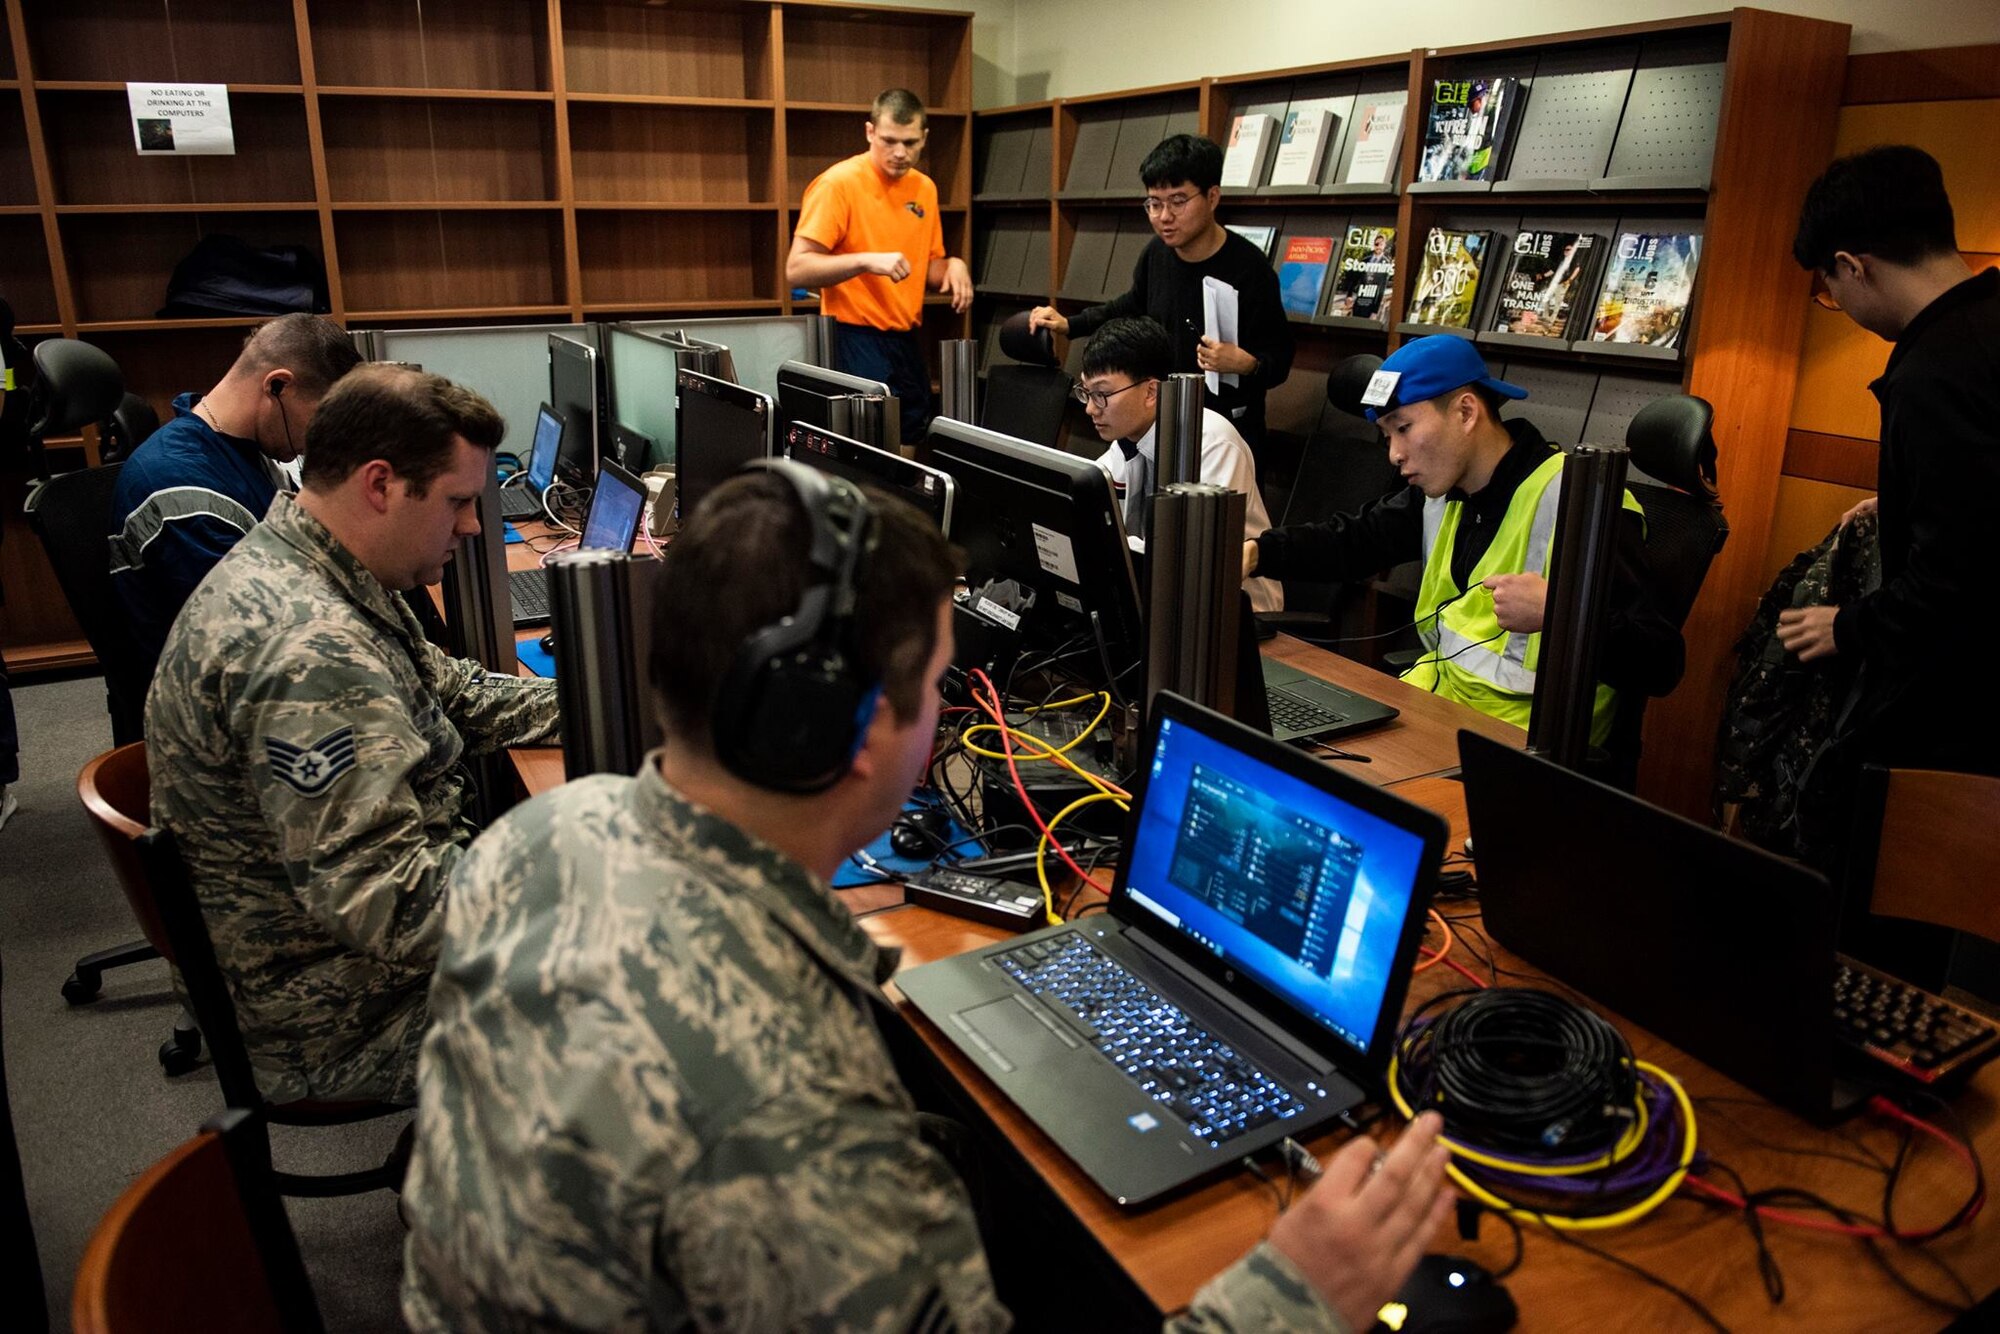 8th Fighter Wing members face off with 38th Fighter Group personnel in the video game “League of Legends” at Kunsan Air Base, Republic of Korea, Nov. 9, 2018. The US-ROKAF Friendship Day focused on celebrating the partnership and alliance between the 8th Fighter Wing and 38th Fighter Group, who participated in several sporting events and competitions throughout the day. (U.S. Air Force photo by Senior Airman Stefan Alvarez)